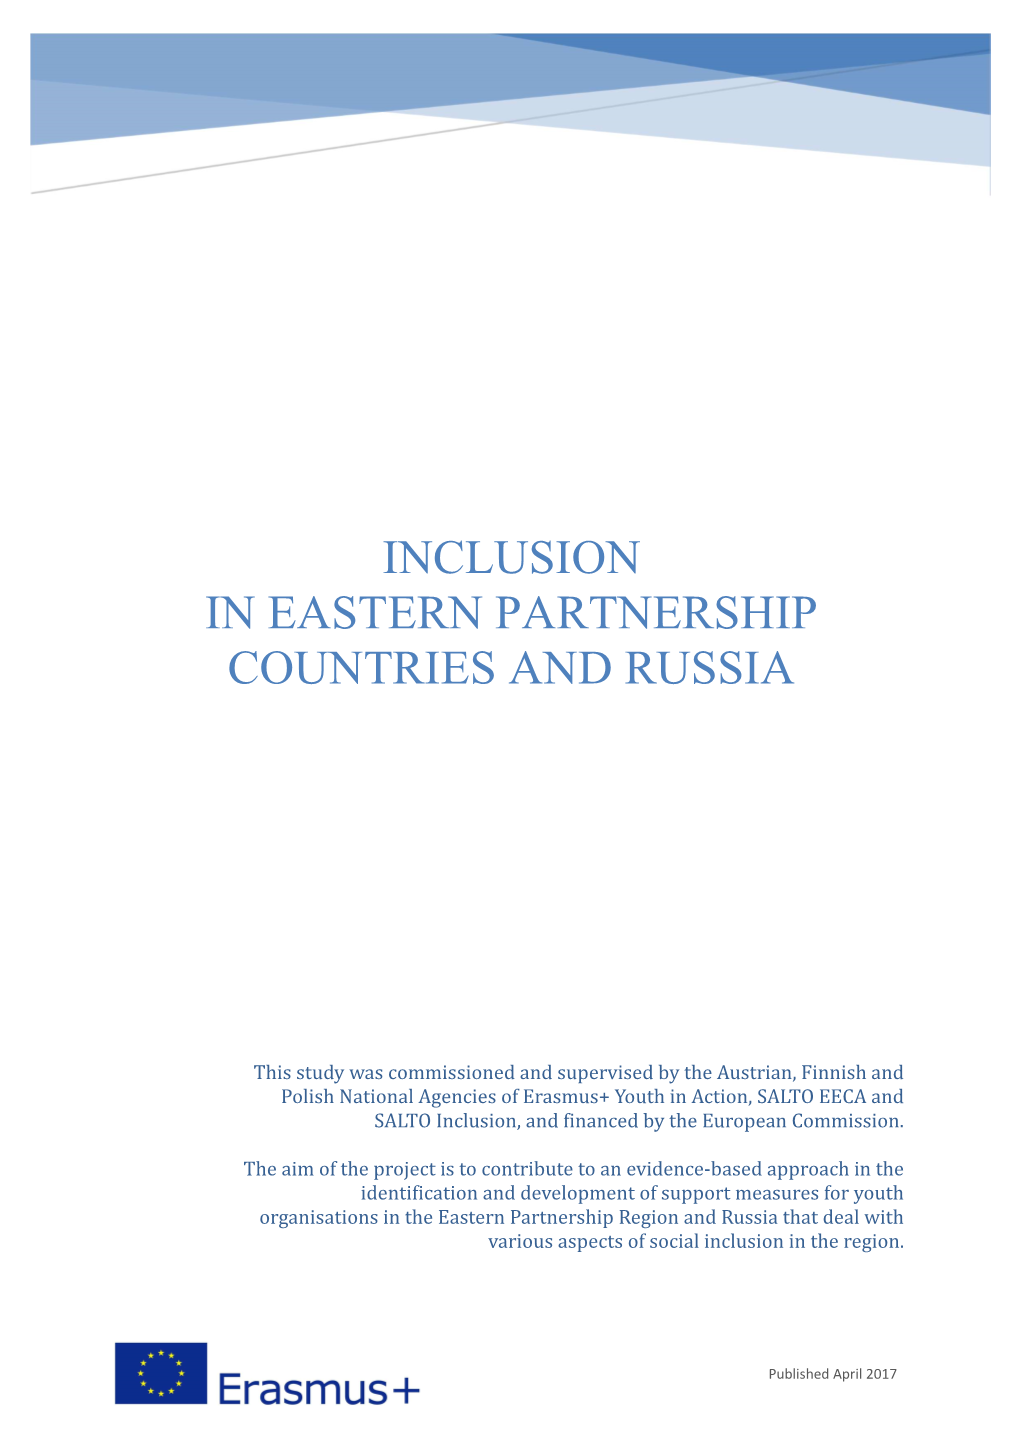 Inclusion in Eastern Partnership Countries and Russia